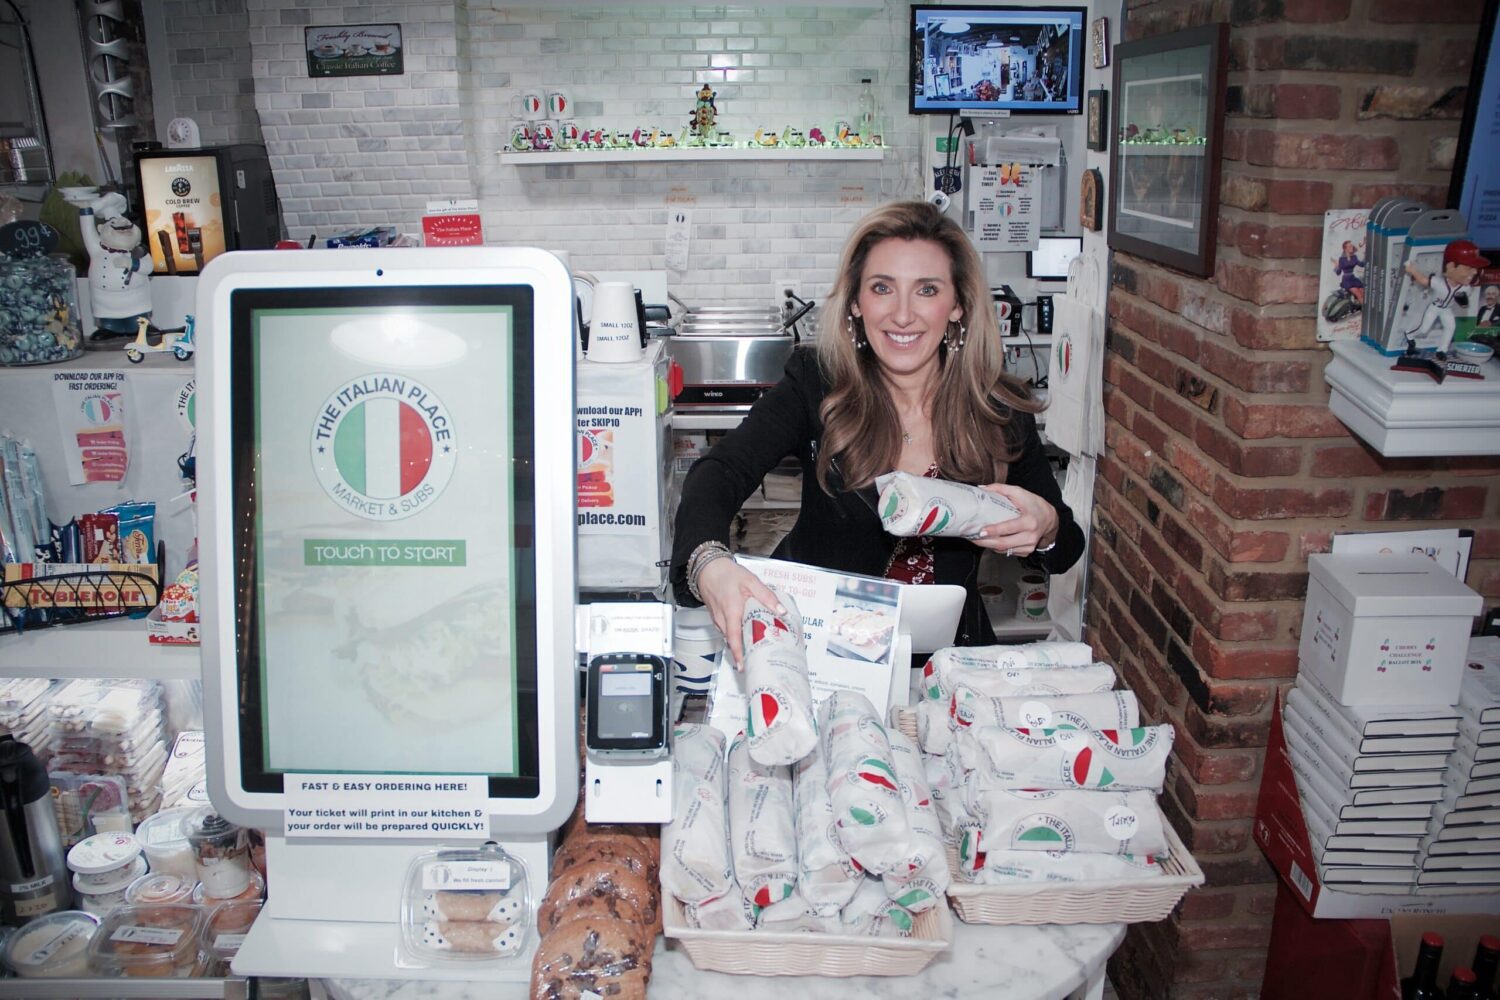 The Italian Place register and founder with sandwiches